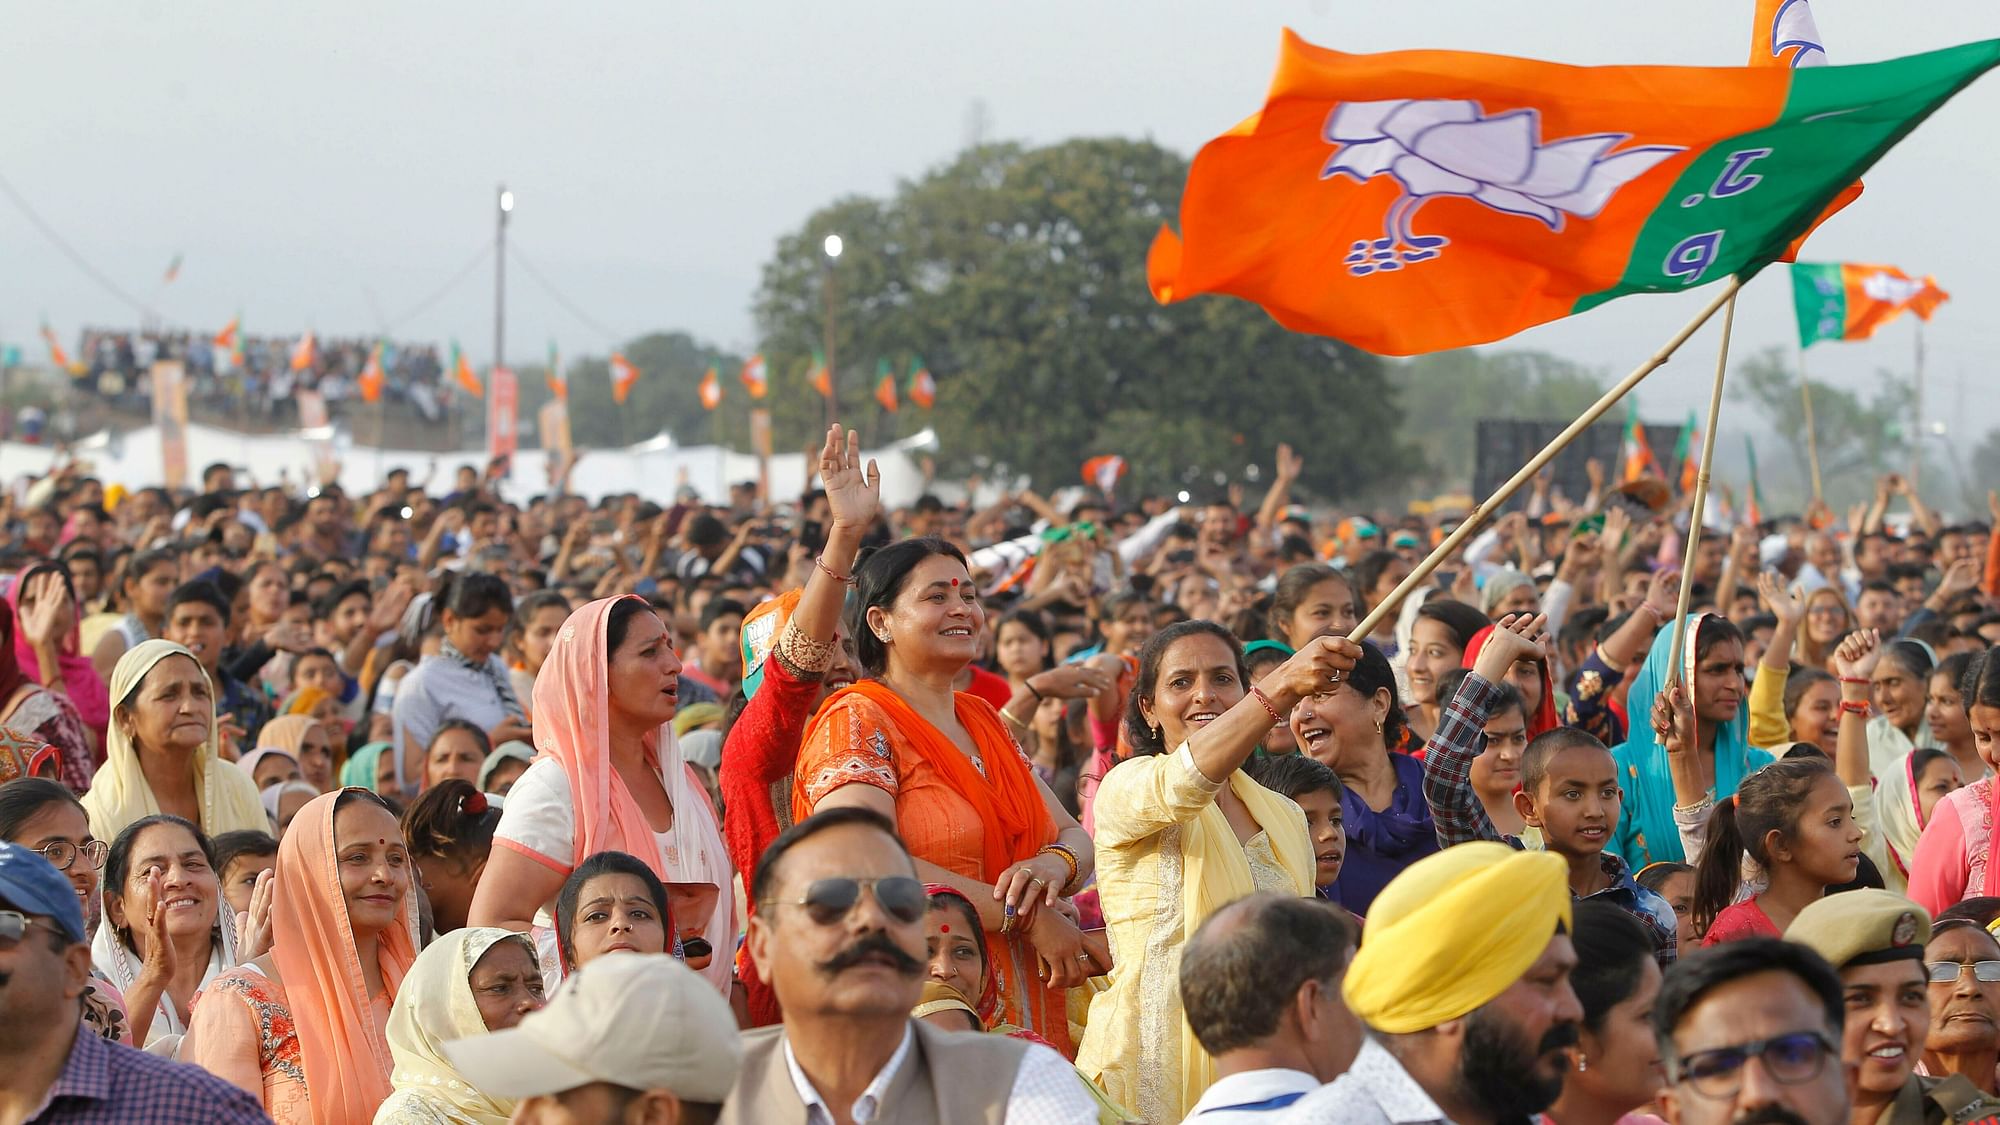 BJP supporters at a rally. Image used for representational purposes.